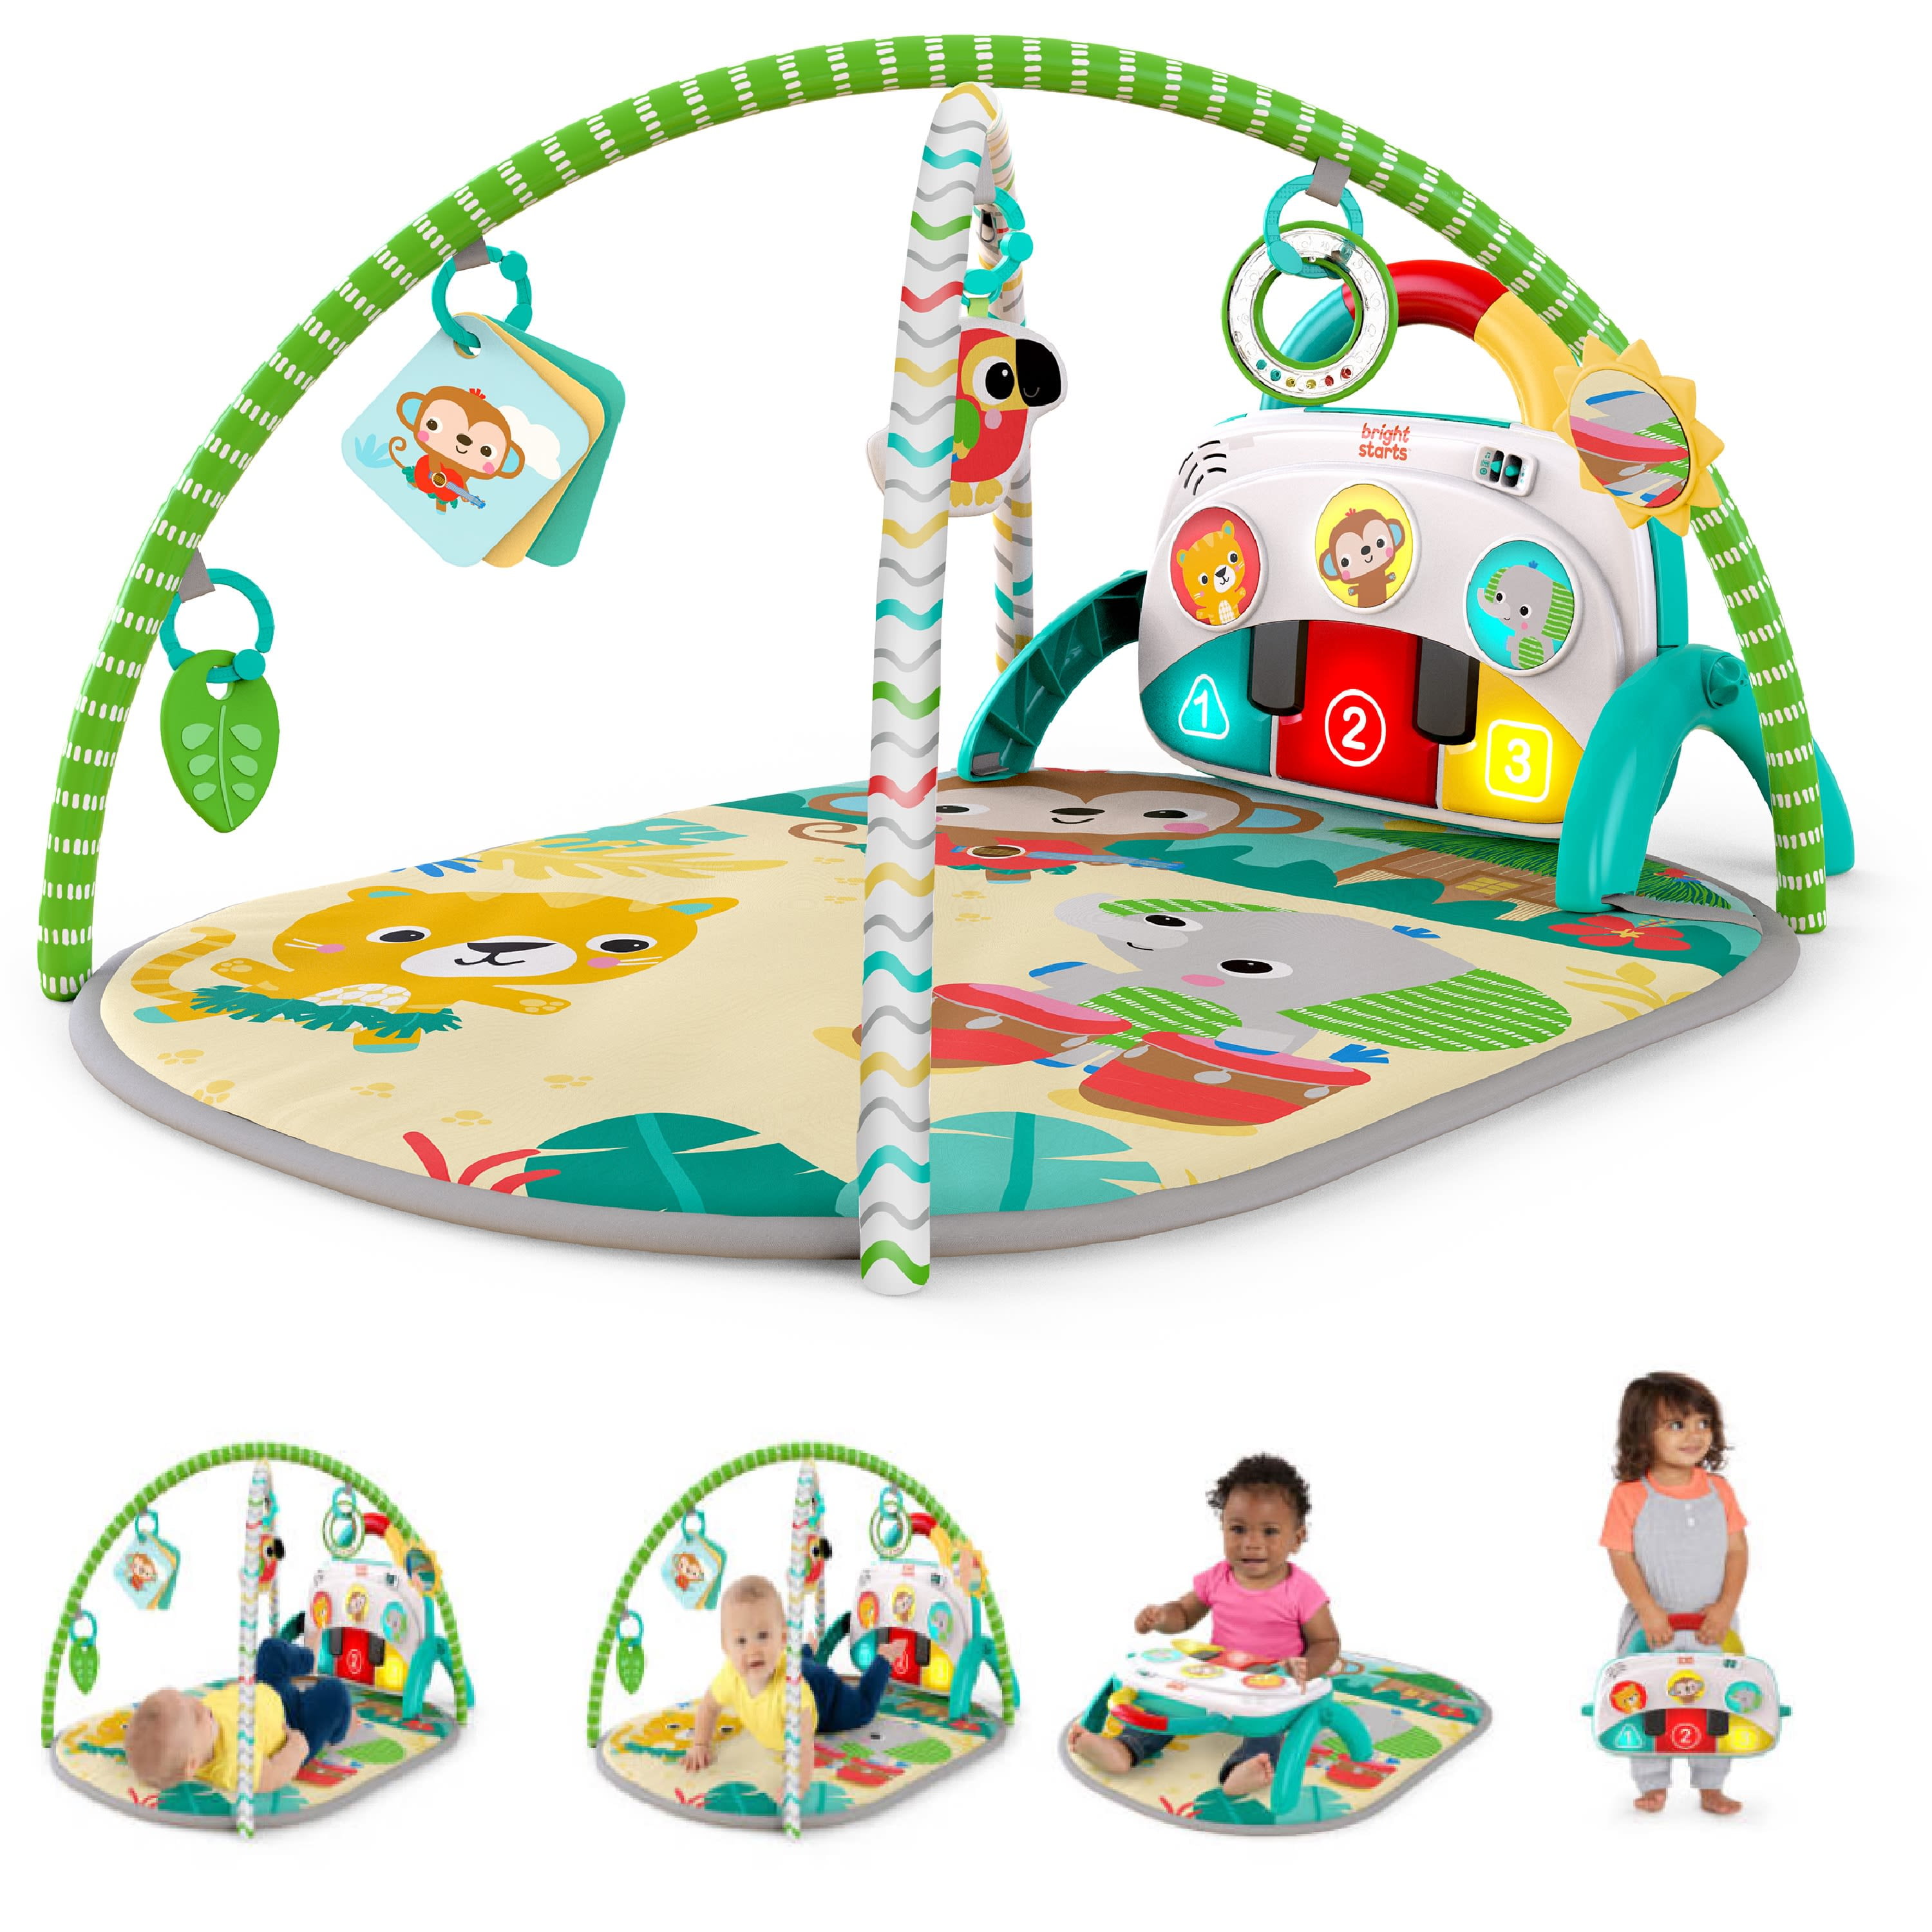 3 In 1 Rainforest Baby Kid Playmat Musical Pedal Piano Activity Fitness Gym Mat 